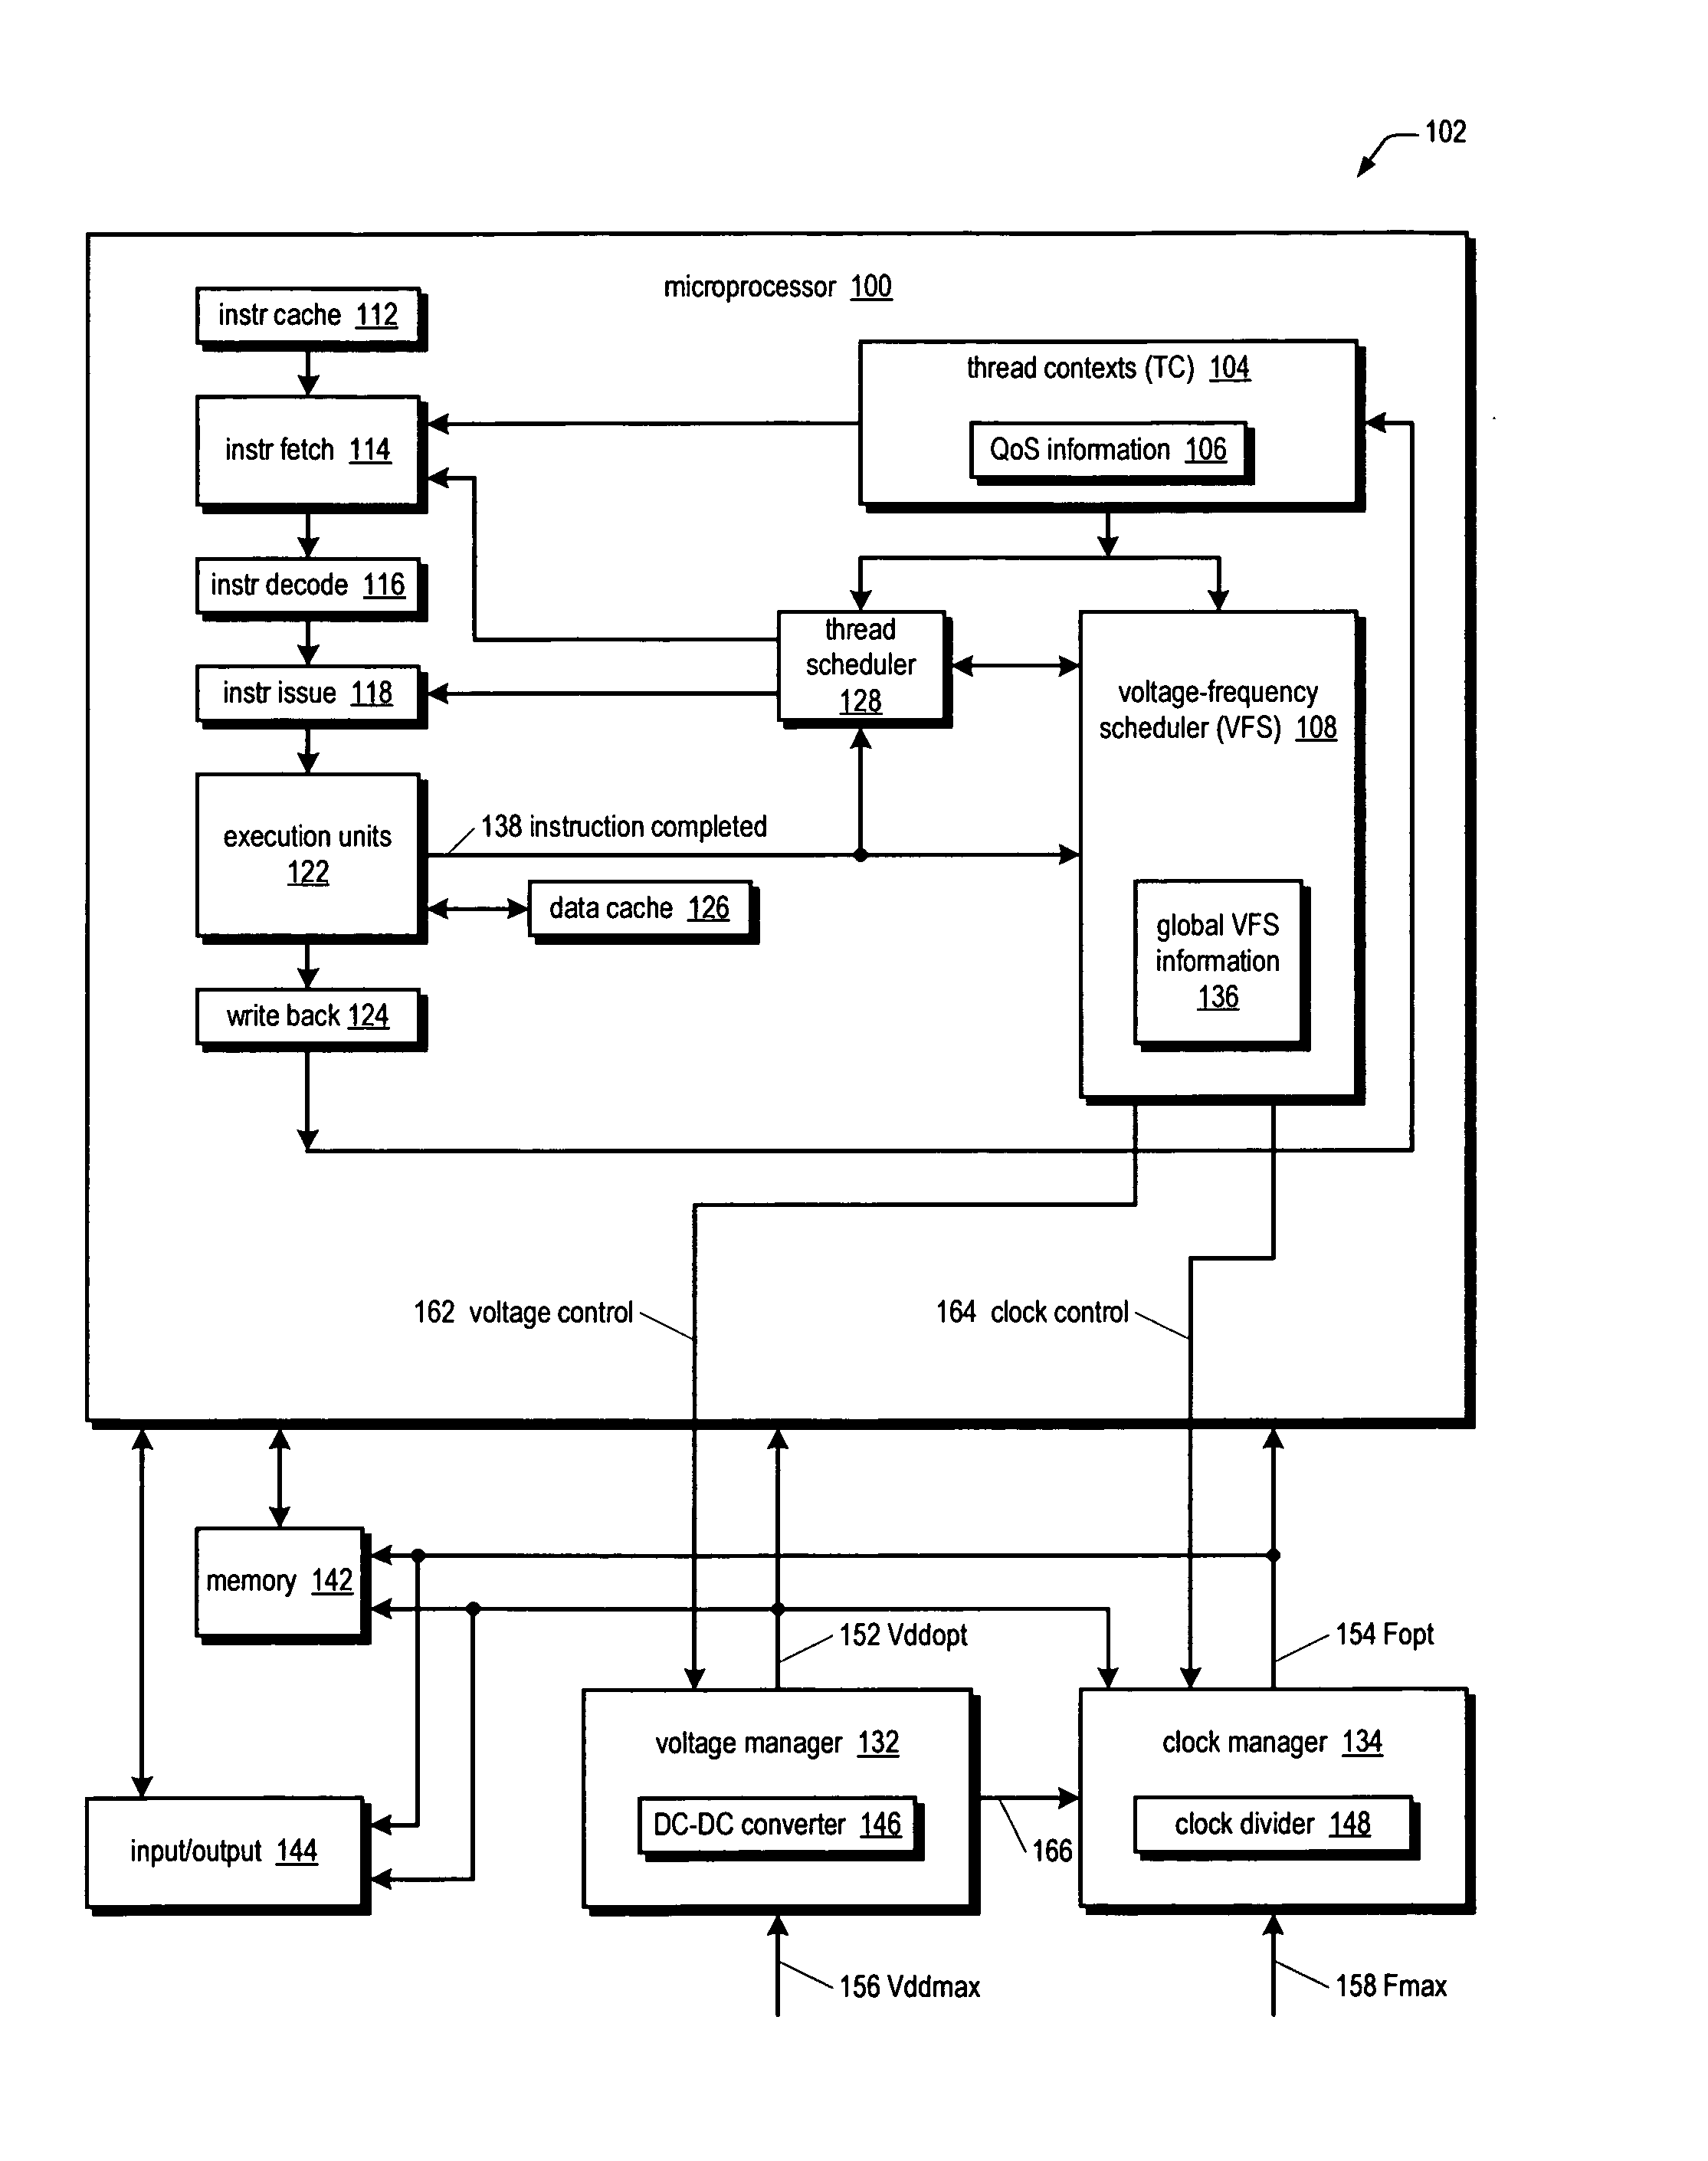 Multithreaded dynamic voltage-frequency scaling microprocessor